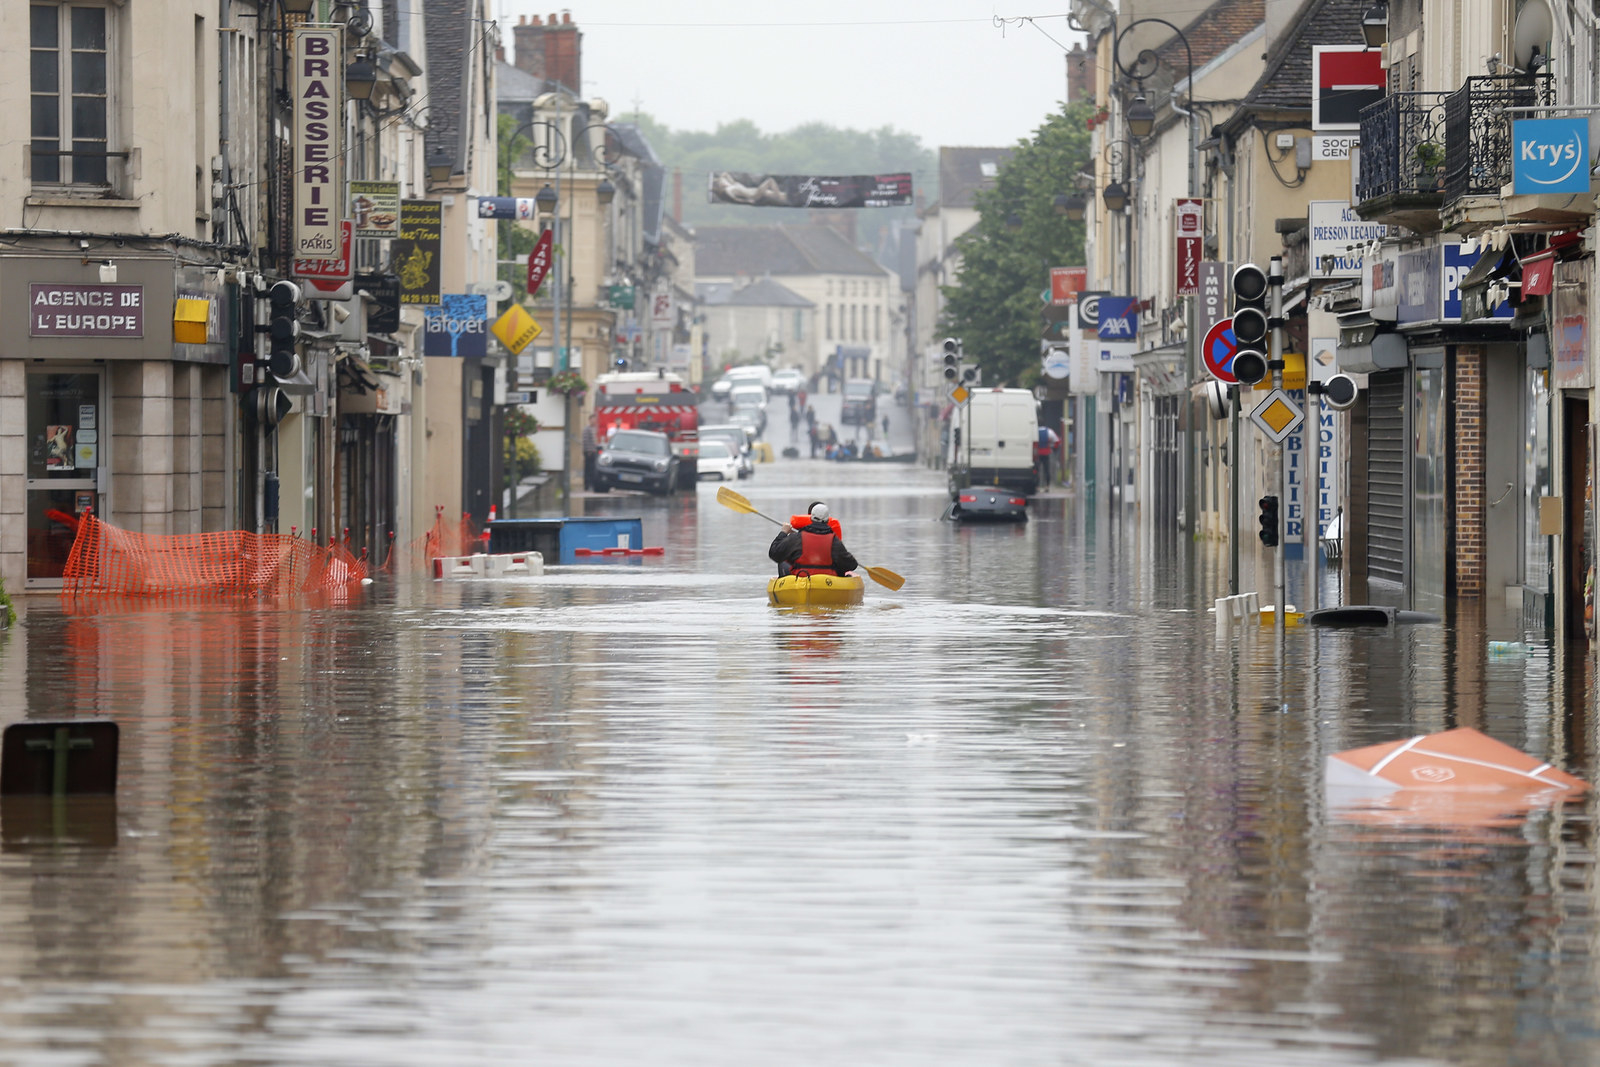 Dramatic Photographs Show Scale Of Flooding Across Europe